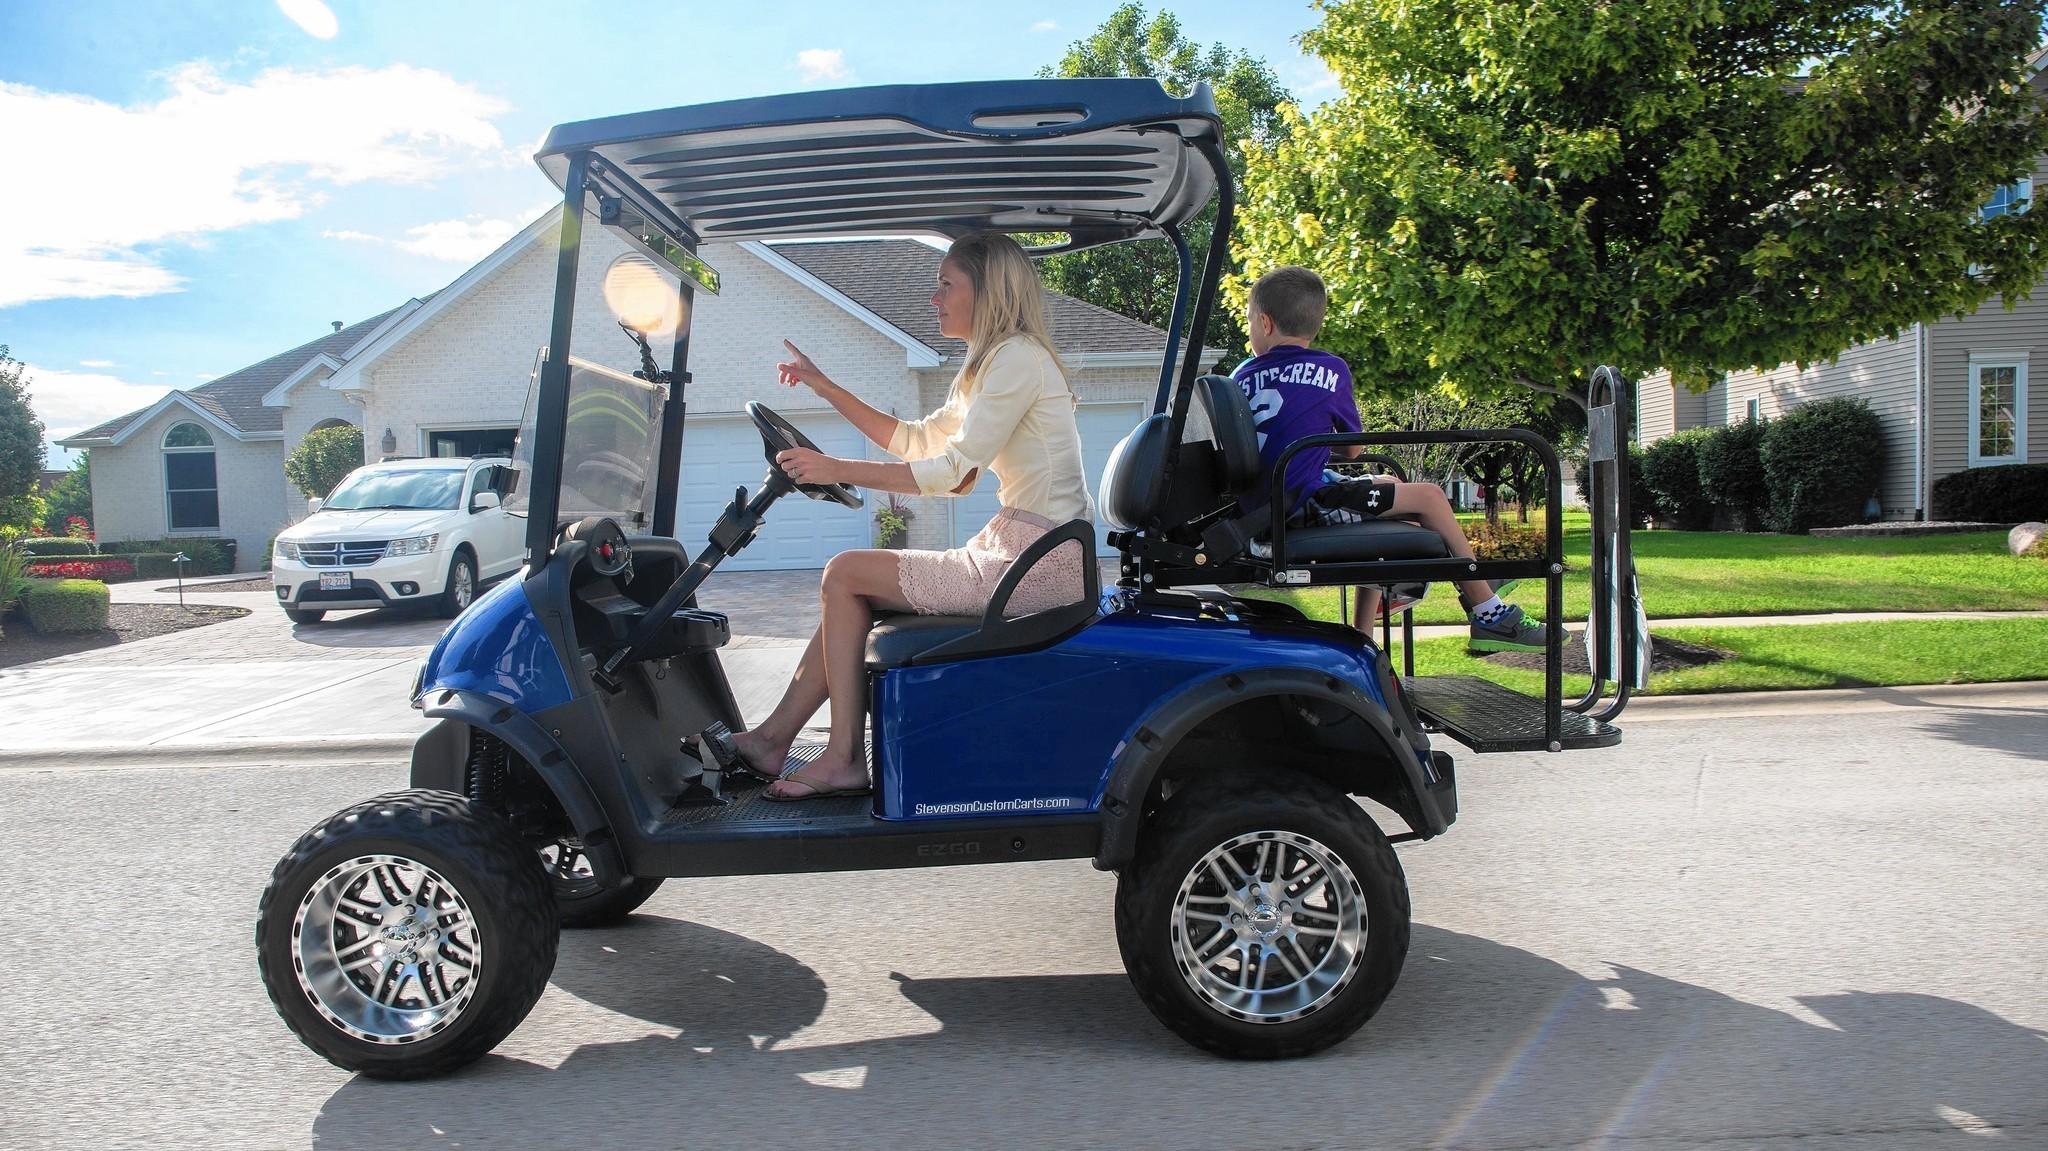 Small Illinois towns drive golf cart popularity, but safety a ...